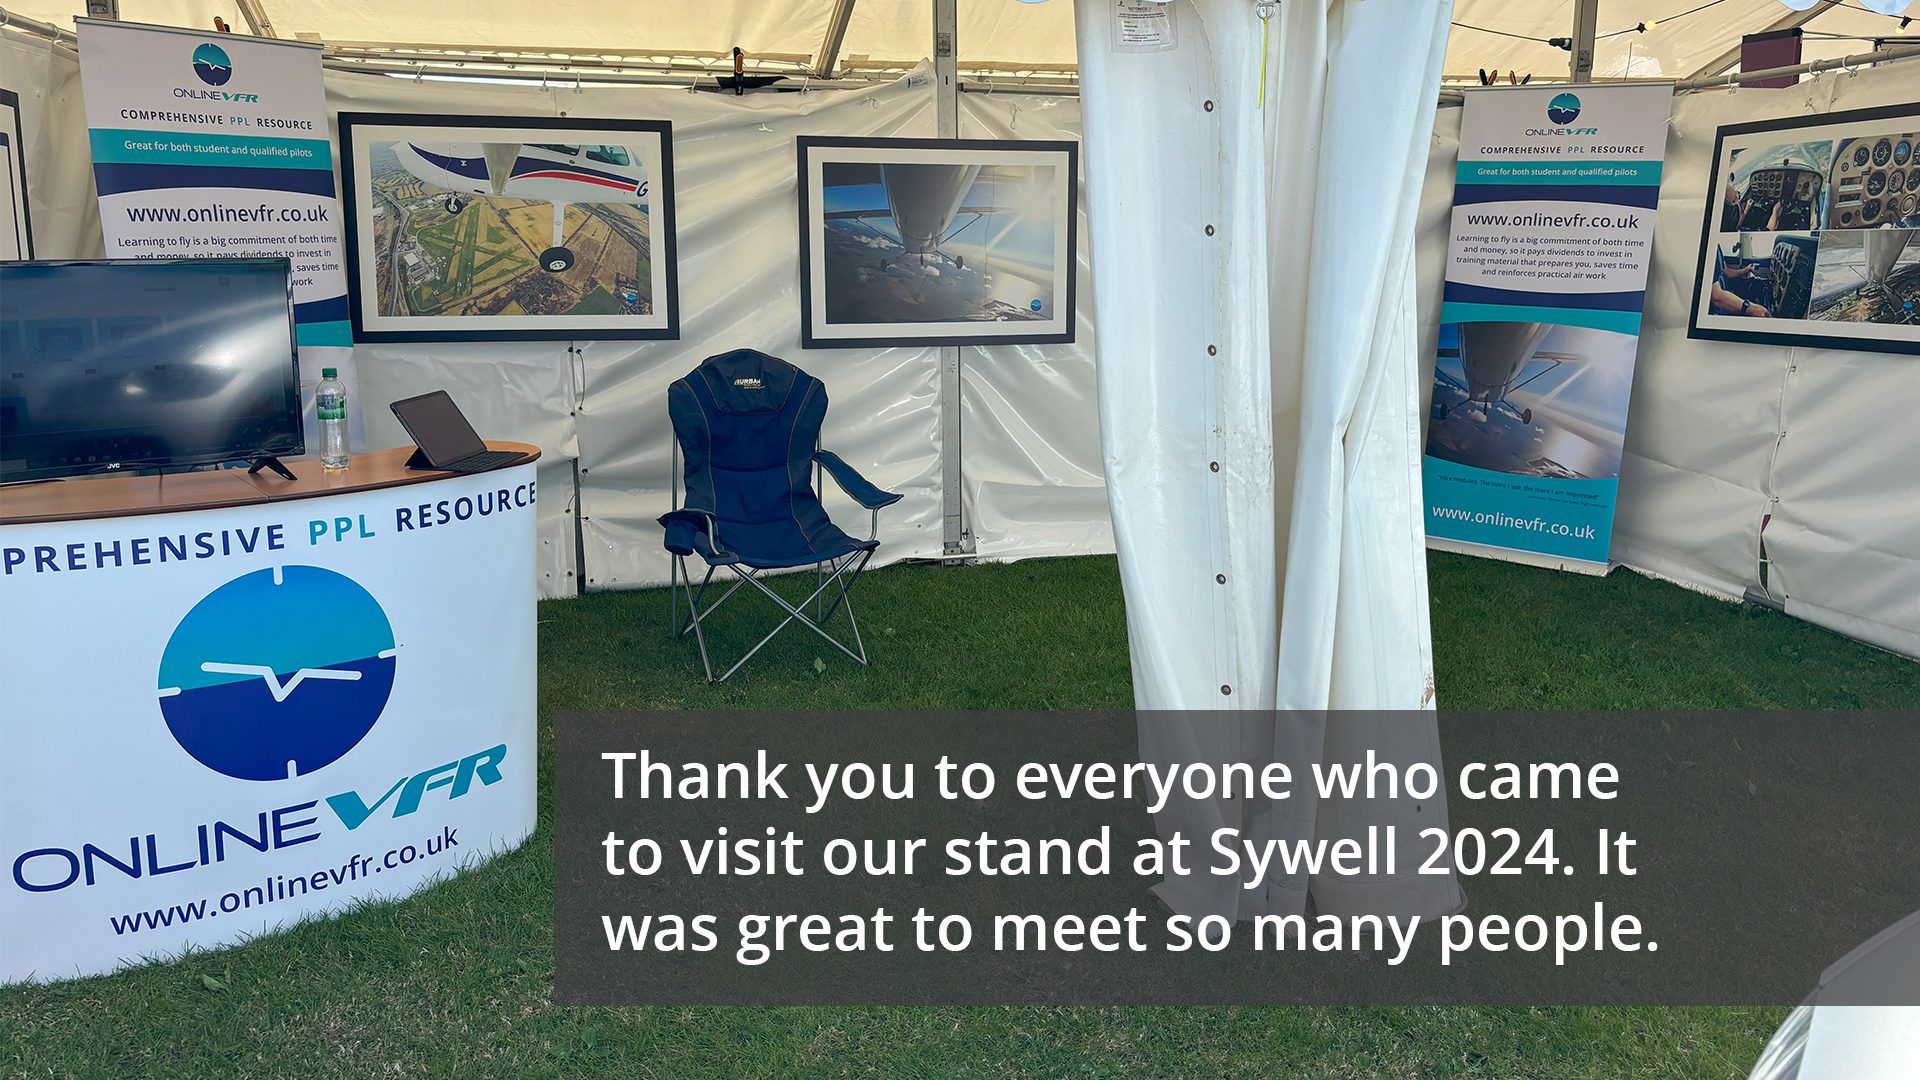 OnlineVFR thanks Sywell2024